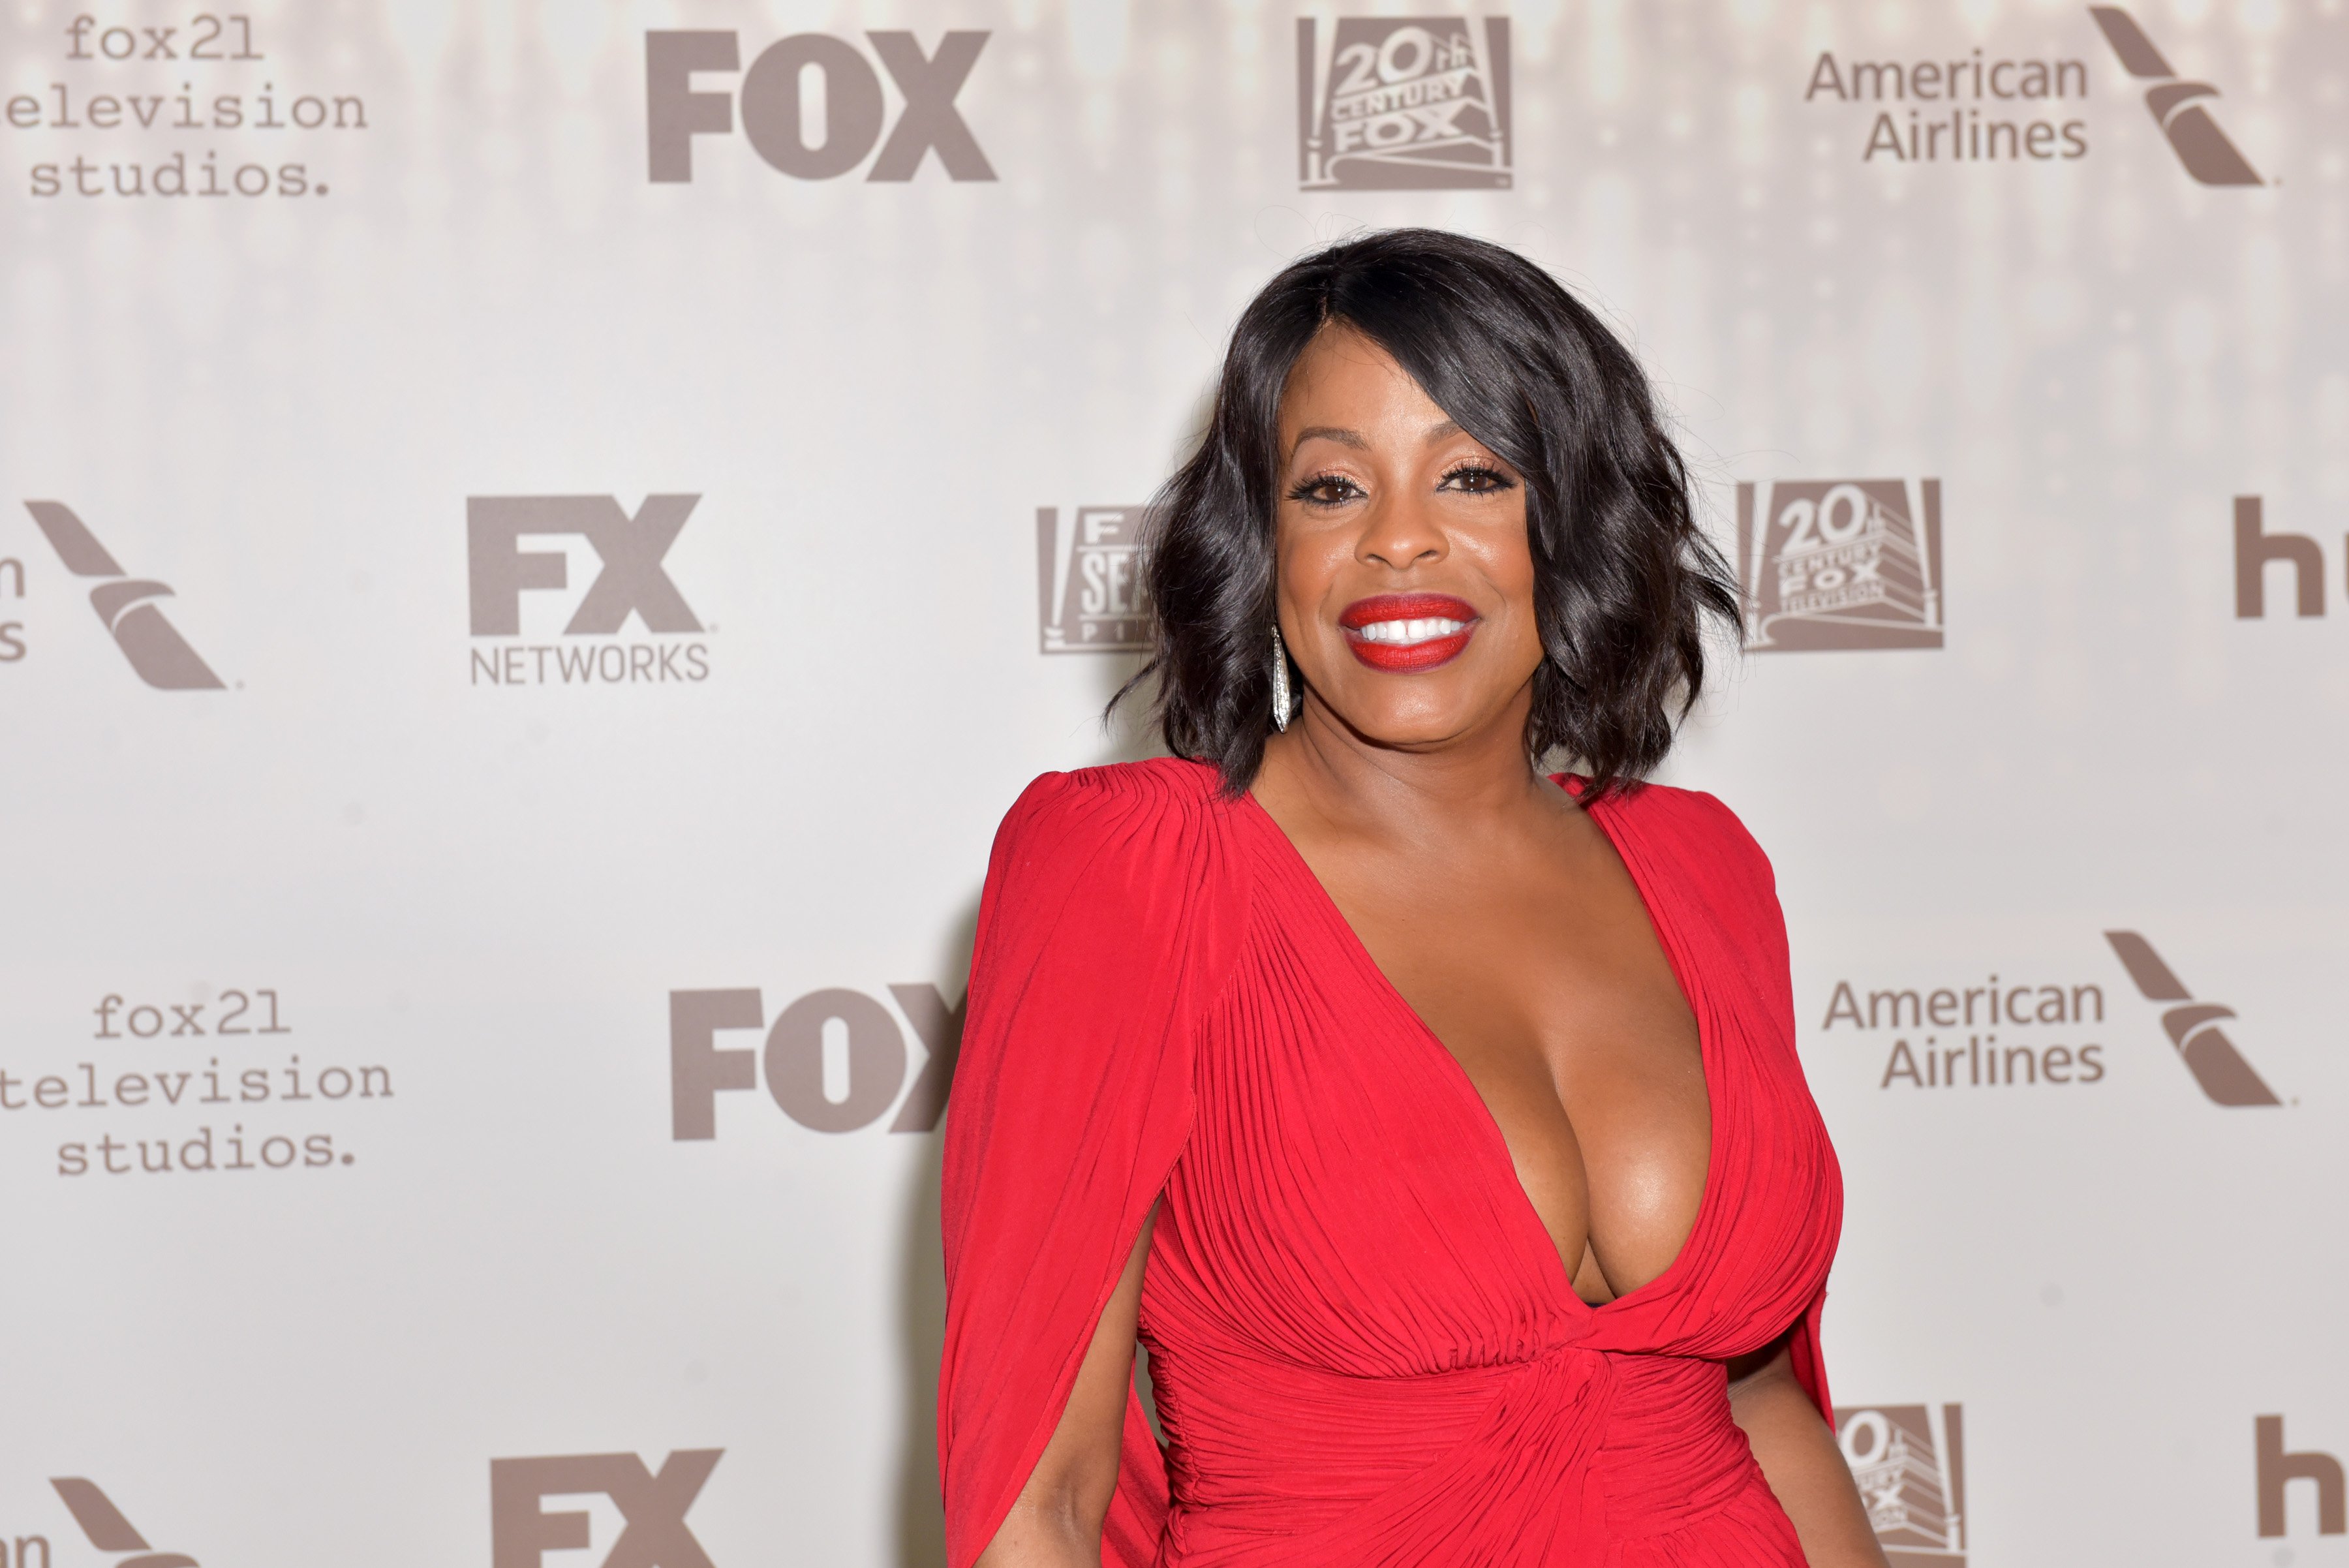 Niecy Nash Sets Hearts Racing on a Yacht Showing Her Long Legs in a